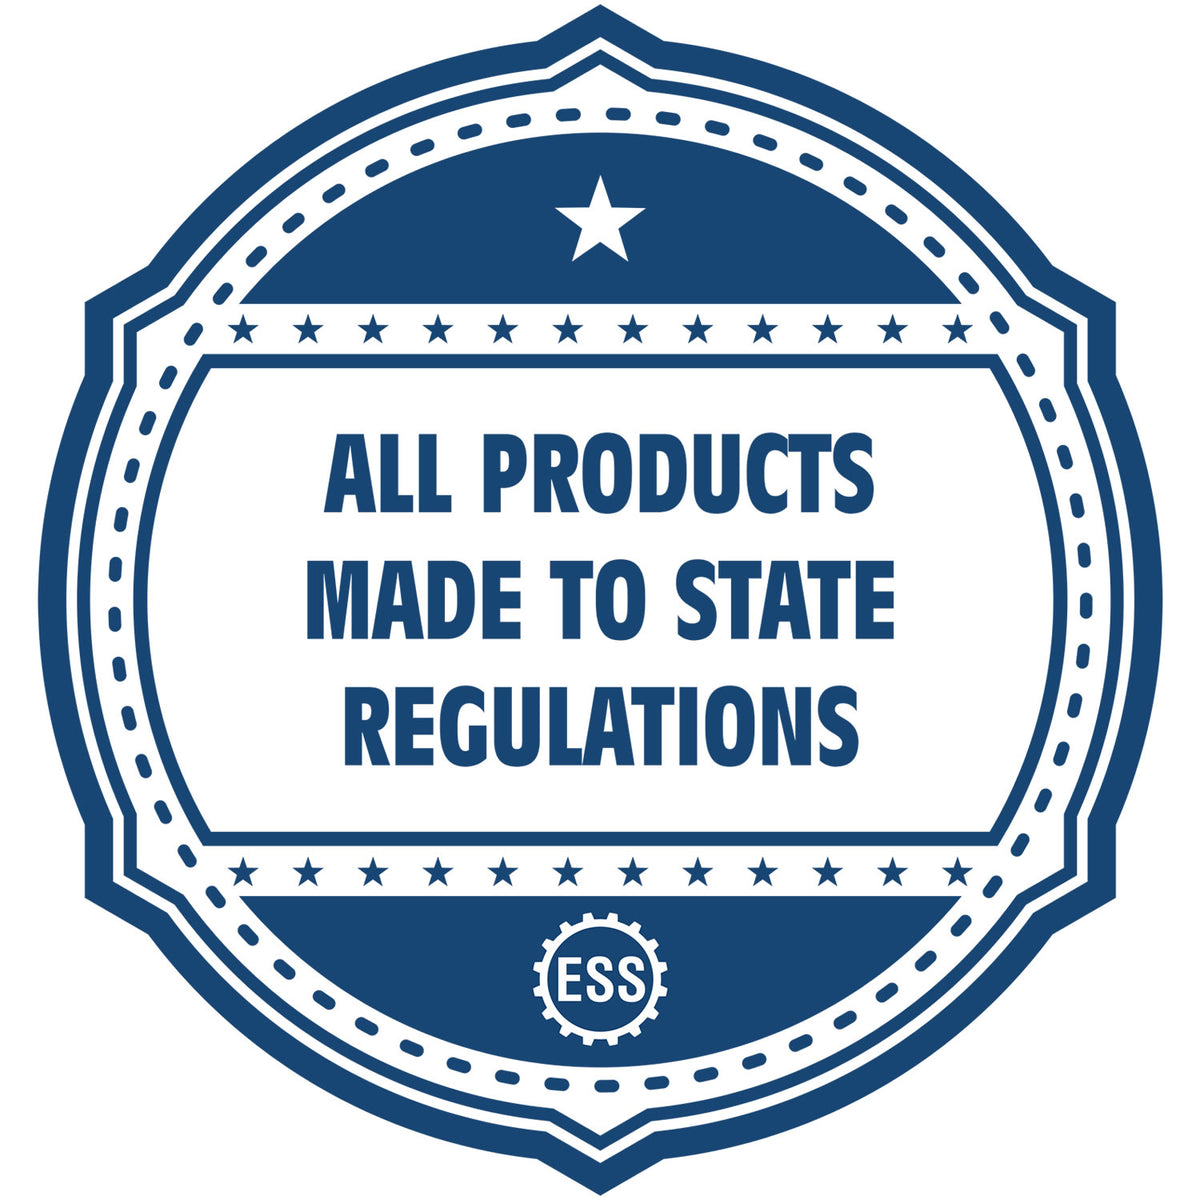 A blue icon or badge for the Slim Pre-Inked West Virginia Professional Geologist Seal Stamp showing that this product is made in compliance with state regulations.